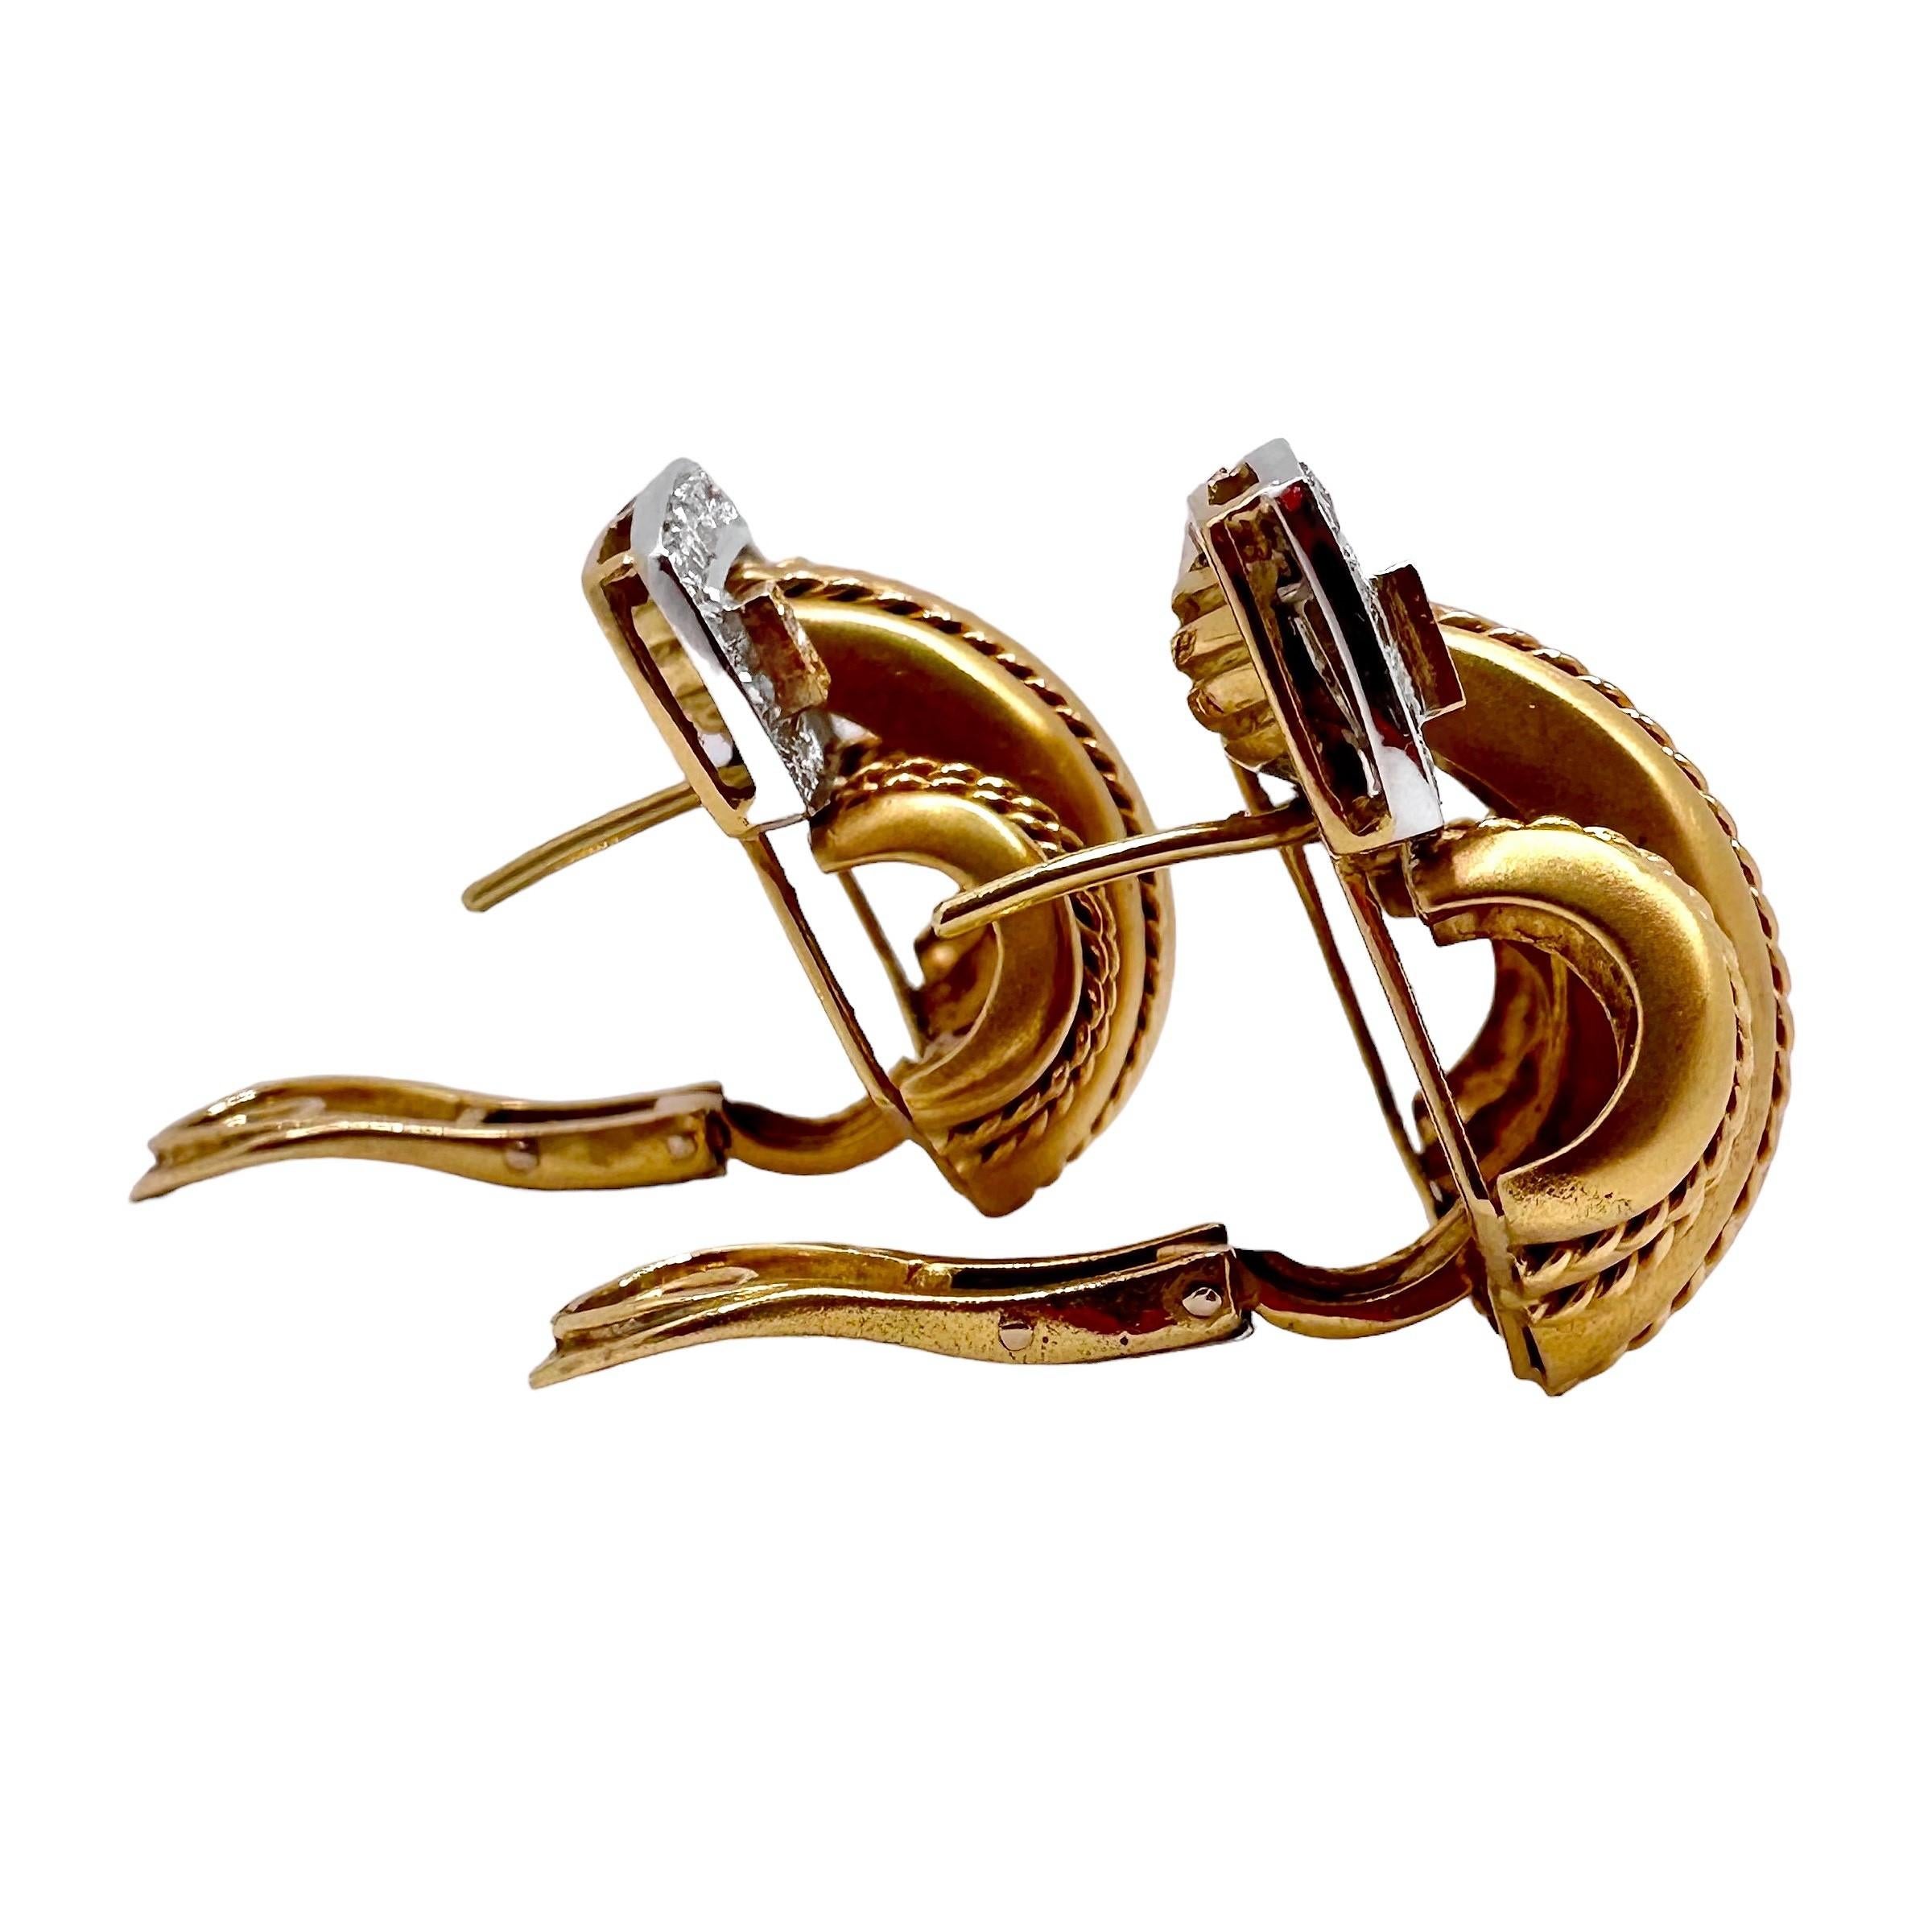 Brilliant Cut Elegant Scroll Top 18k Gold Earrings with Hand Twisted Wire Rope Details For Sale